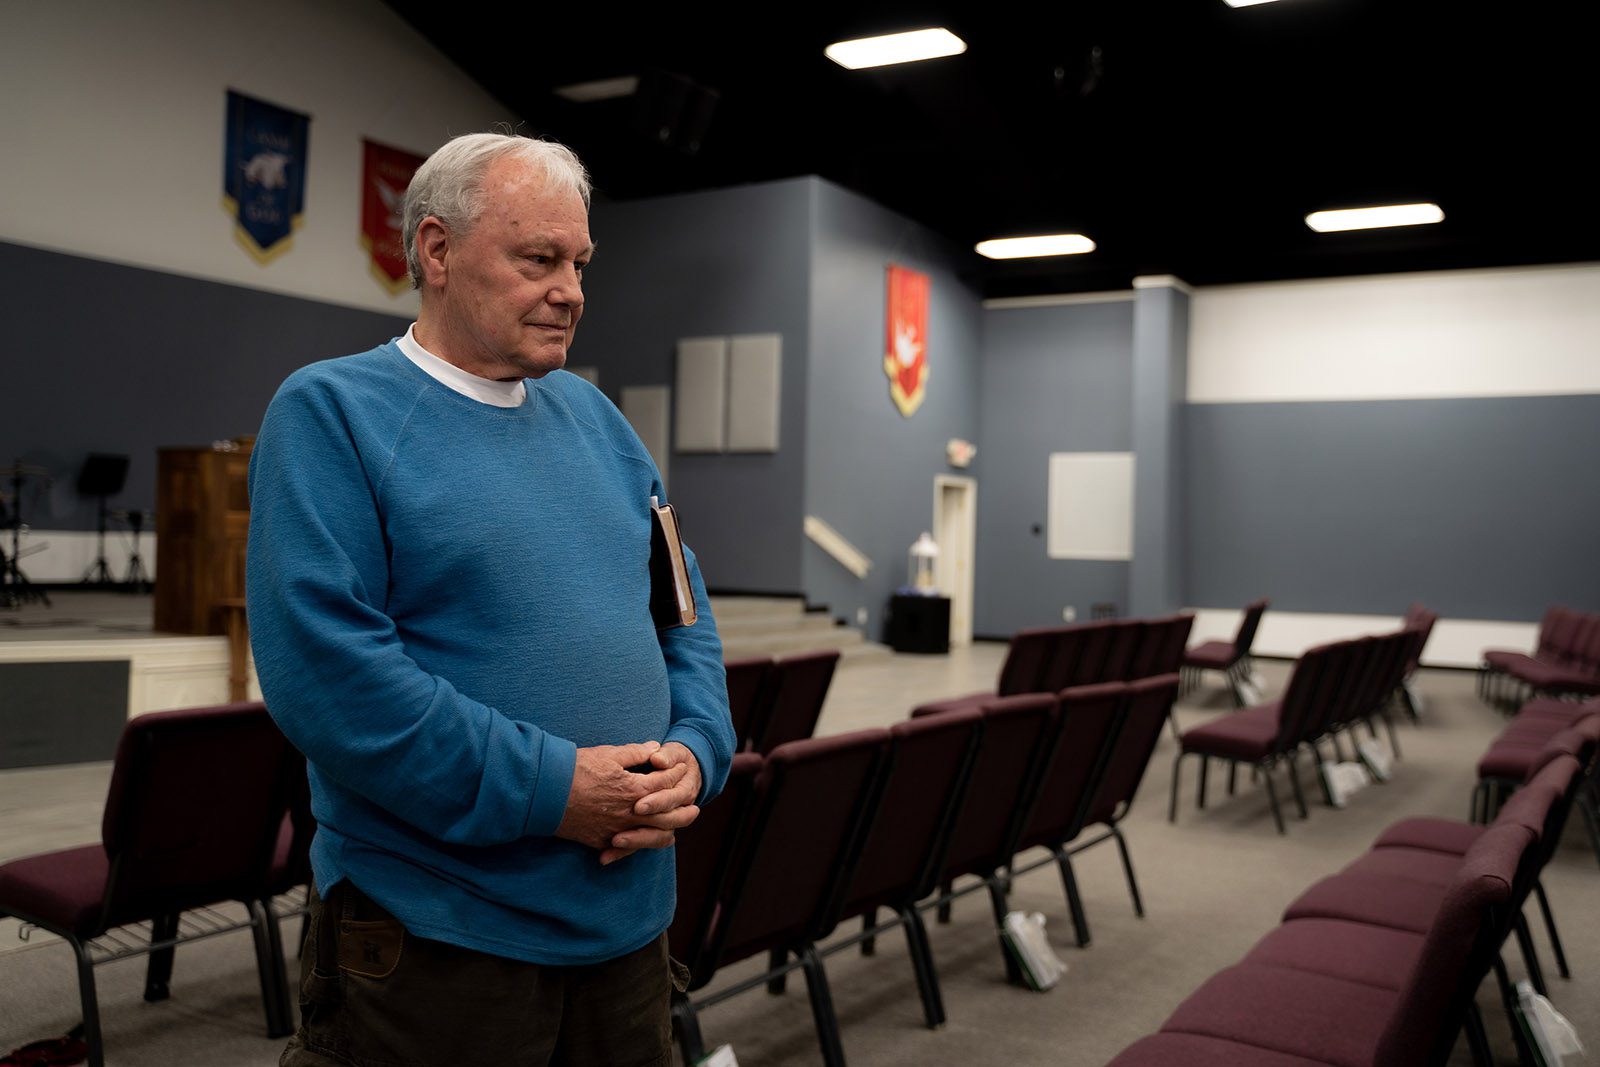 Pastor Ron Smith at Church of the King in McAllen, Texas, on March 17, 2022. Photo by Jeremy Lindenfeld